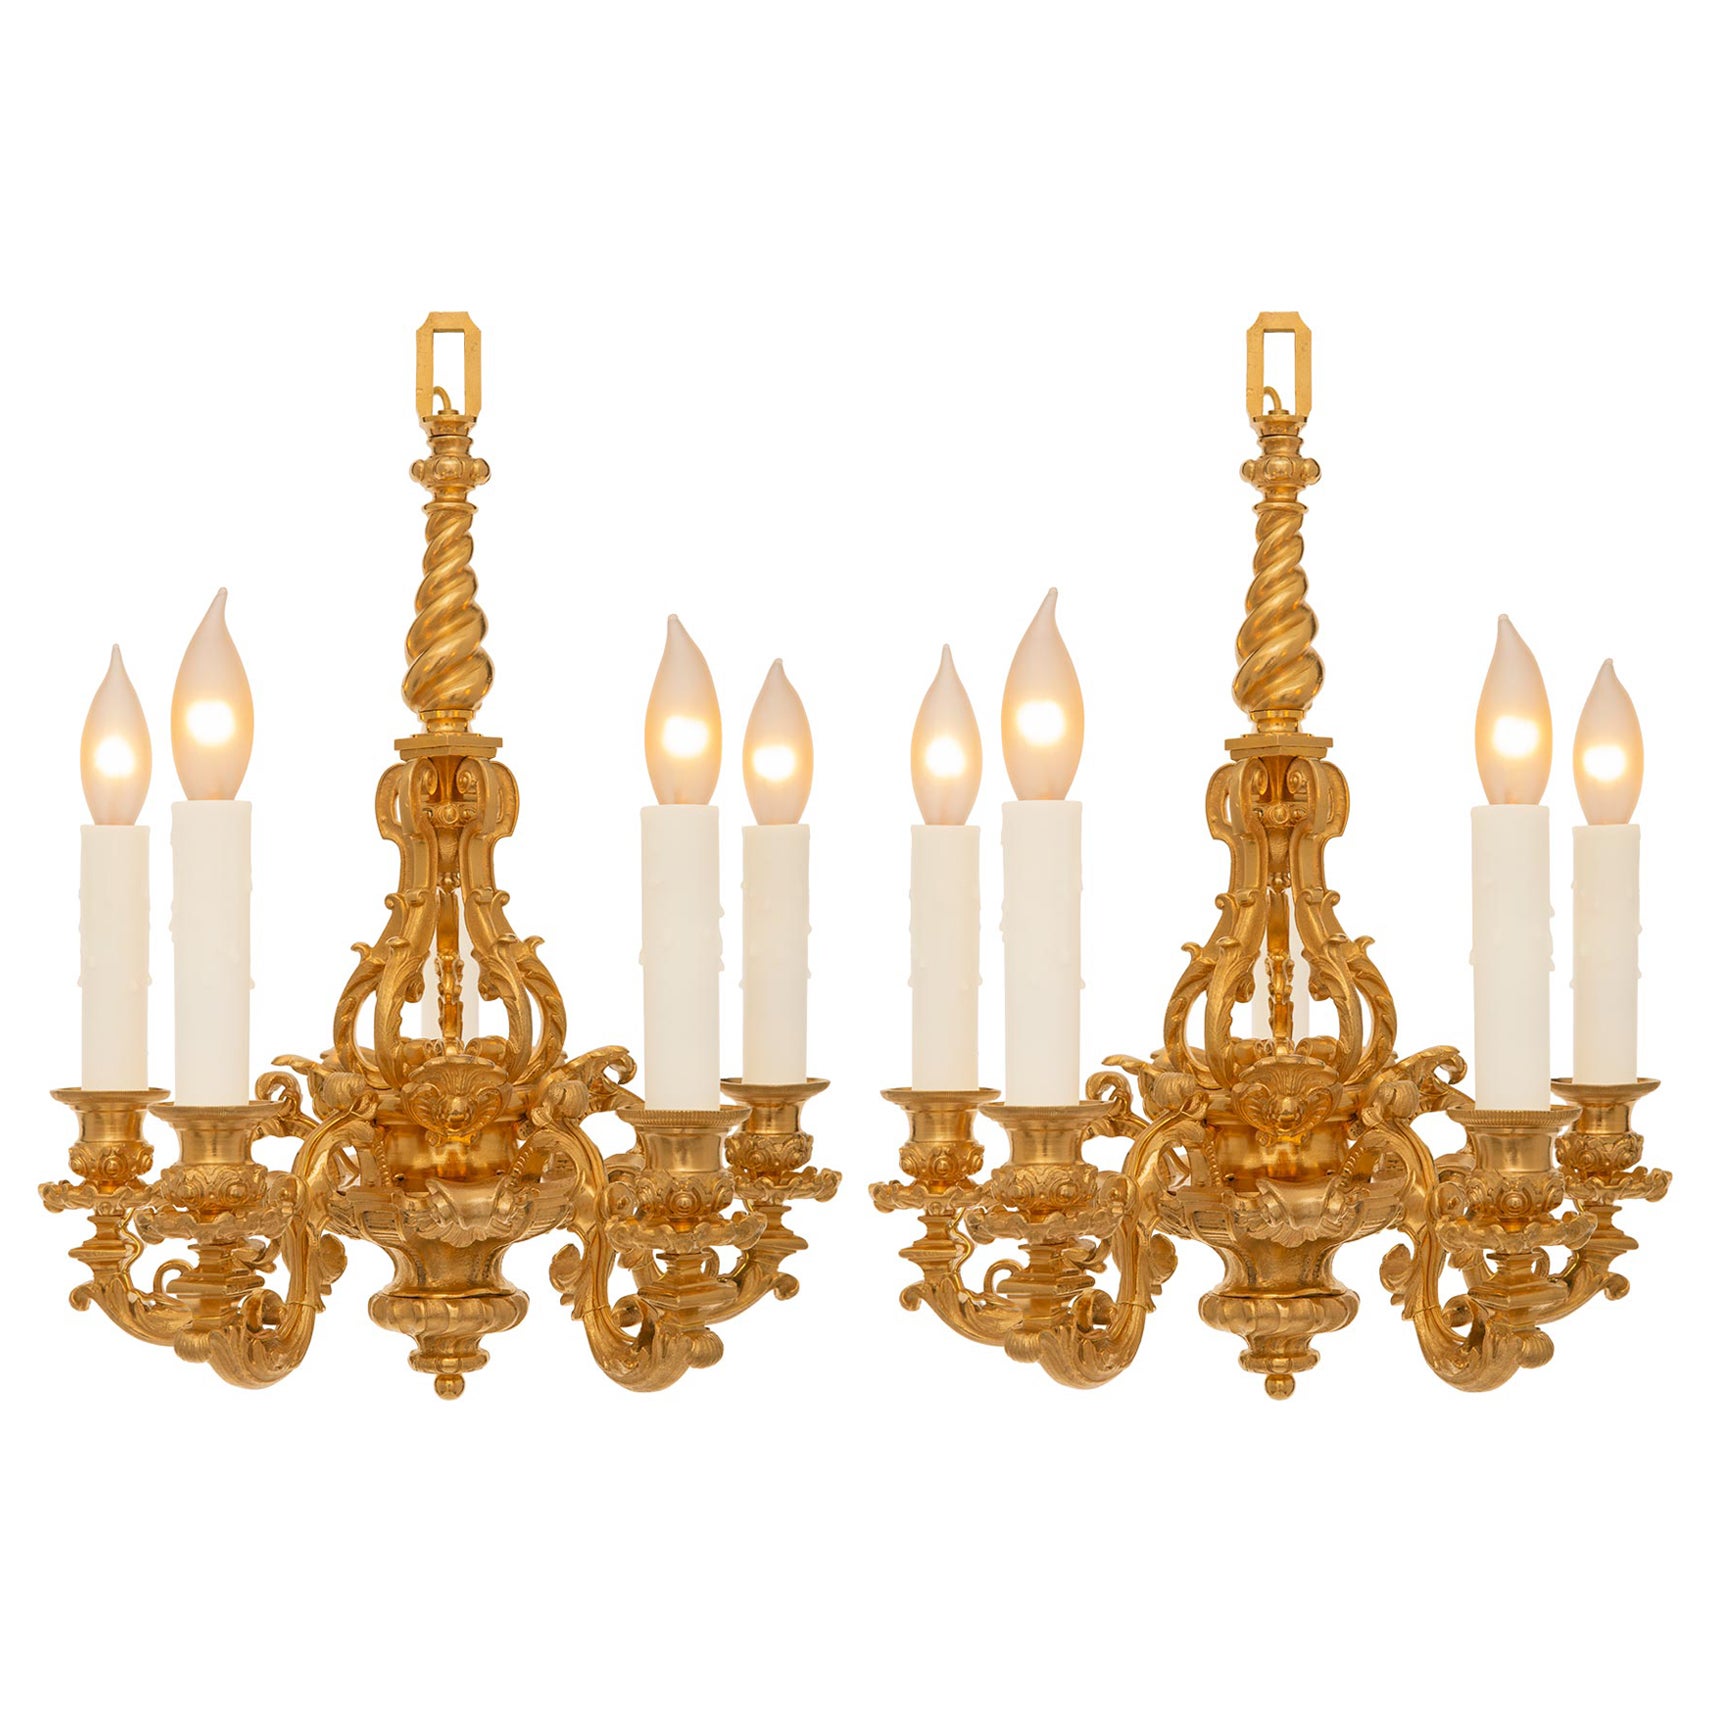 Pair Of French 19th Century Belle Epoque Period Ormolu Chandeliers For Sale